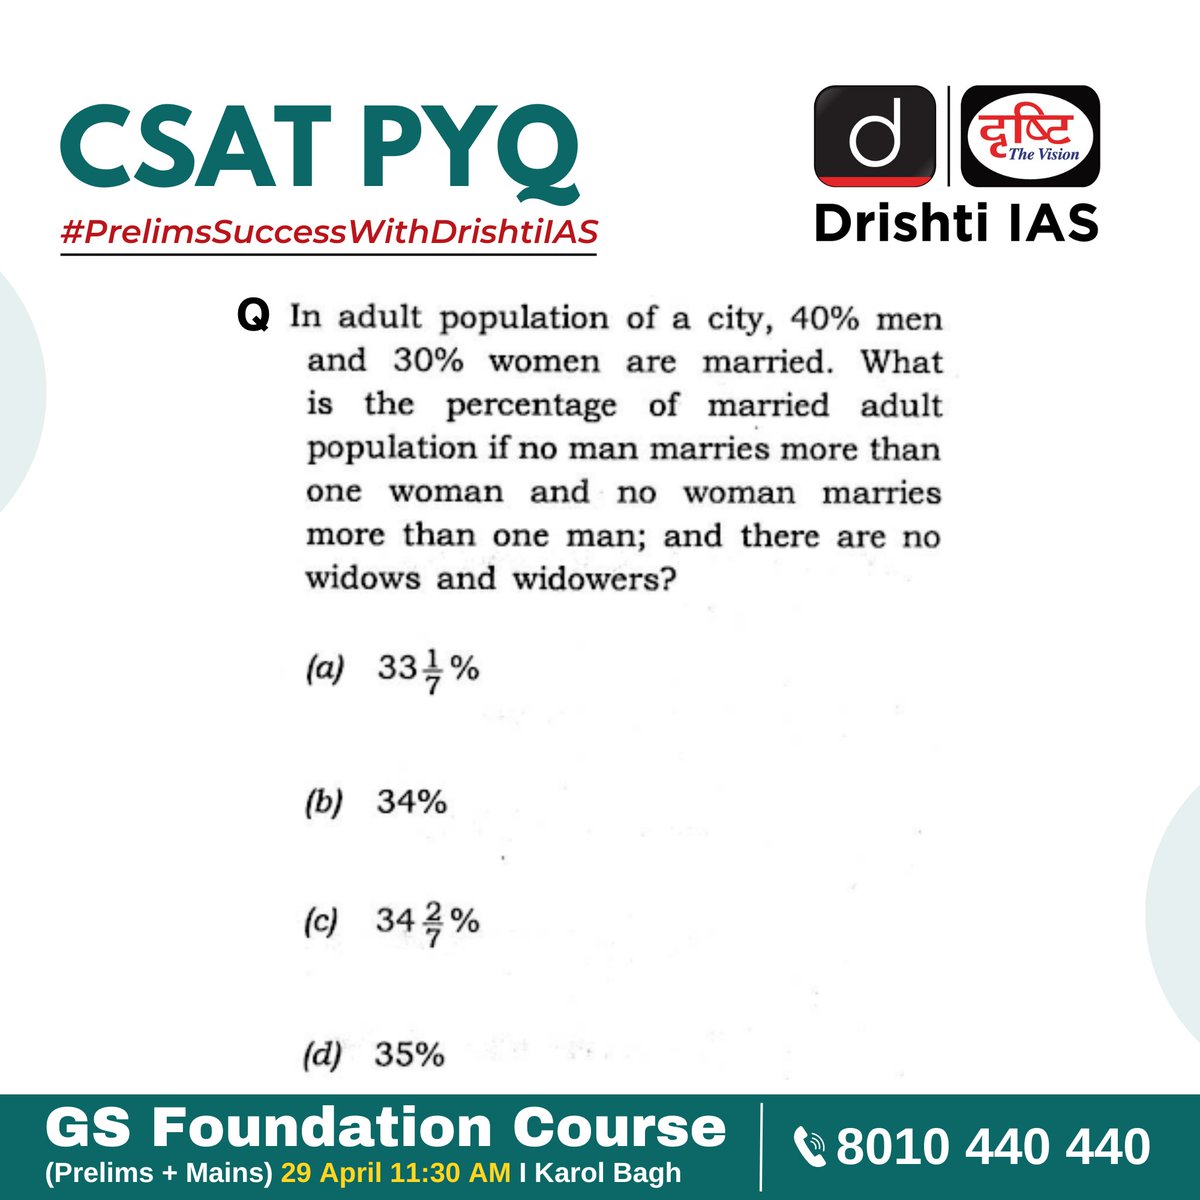 Brush up on your #CSAT2024 preparation! Answer this CSAT PYQ in the comments. Let the preparation begin with #DrishtiCSATPYQ  

#PrelimsSuccessWithDrishtiIAS #PrelimsWithDrishtiIAS #CSAT #PrepCSAT #CSATPYQ #Learn #Learning #Preparation #DrishtiIAS #DrishtiIASEnglish